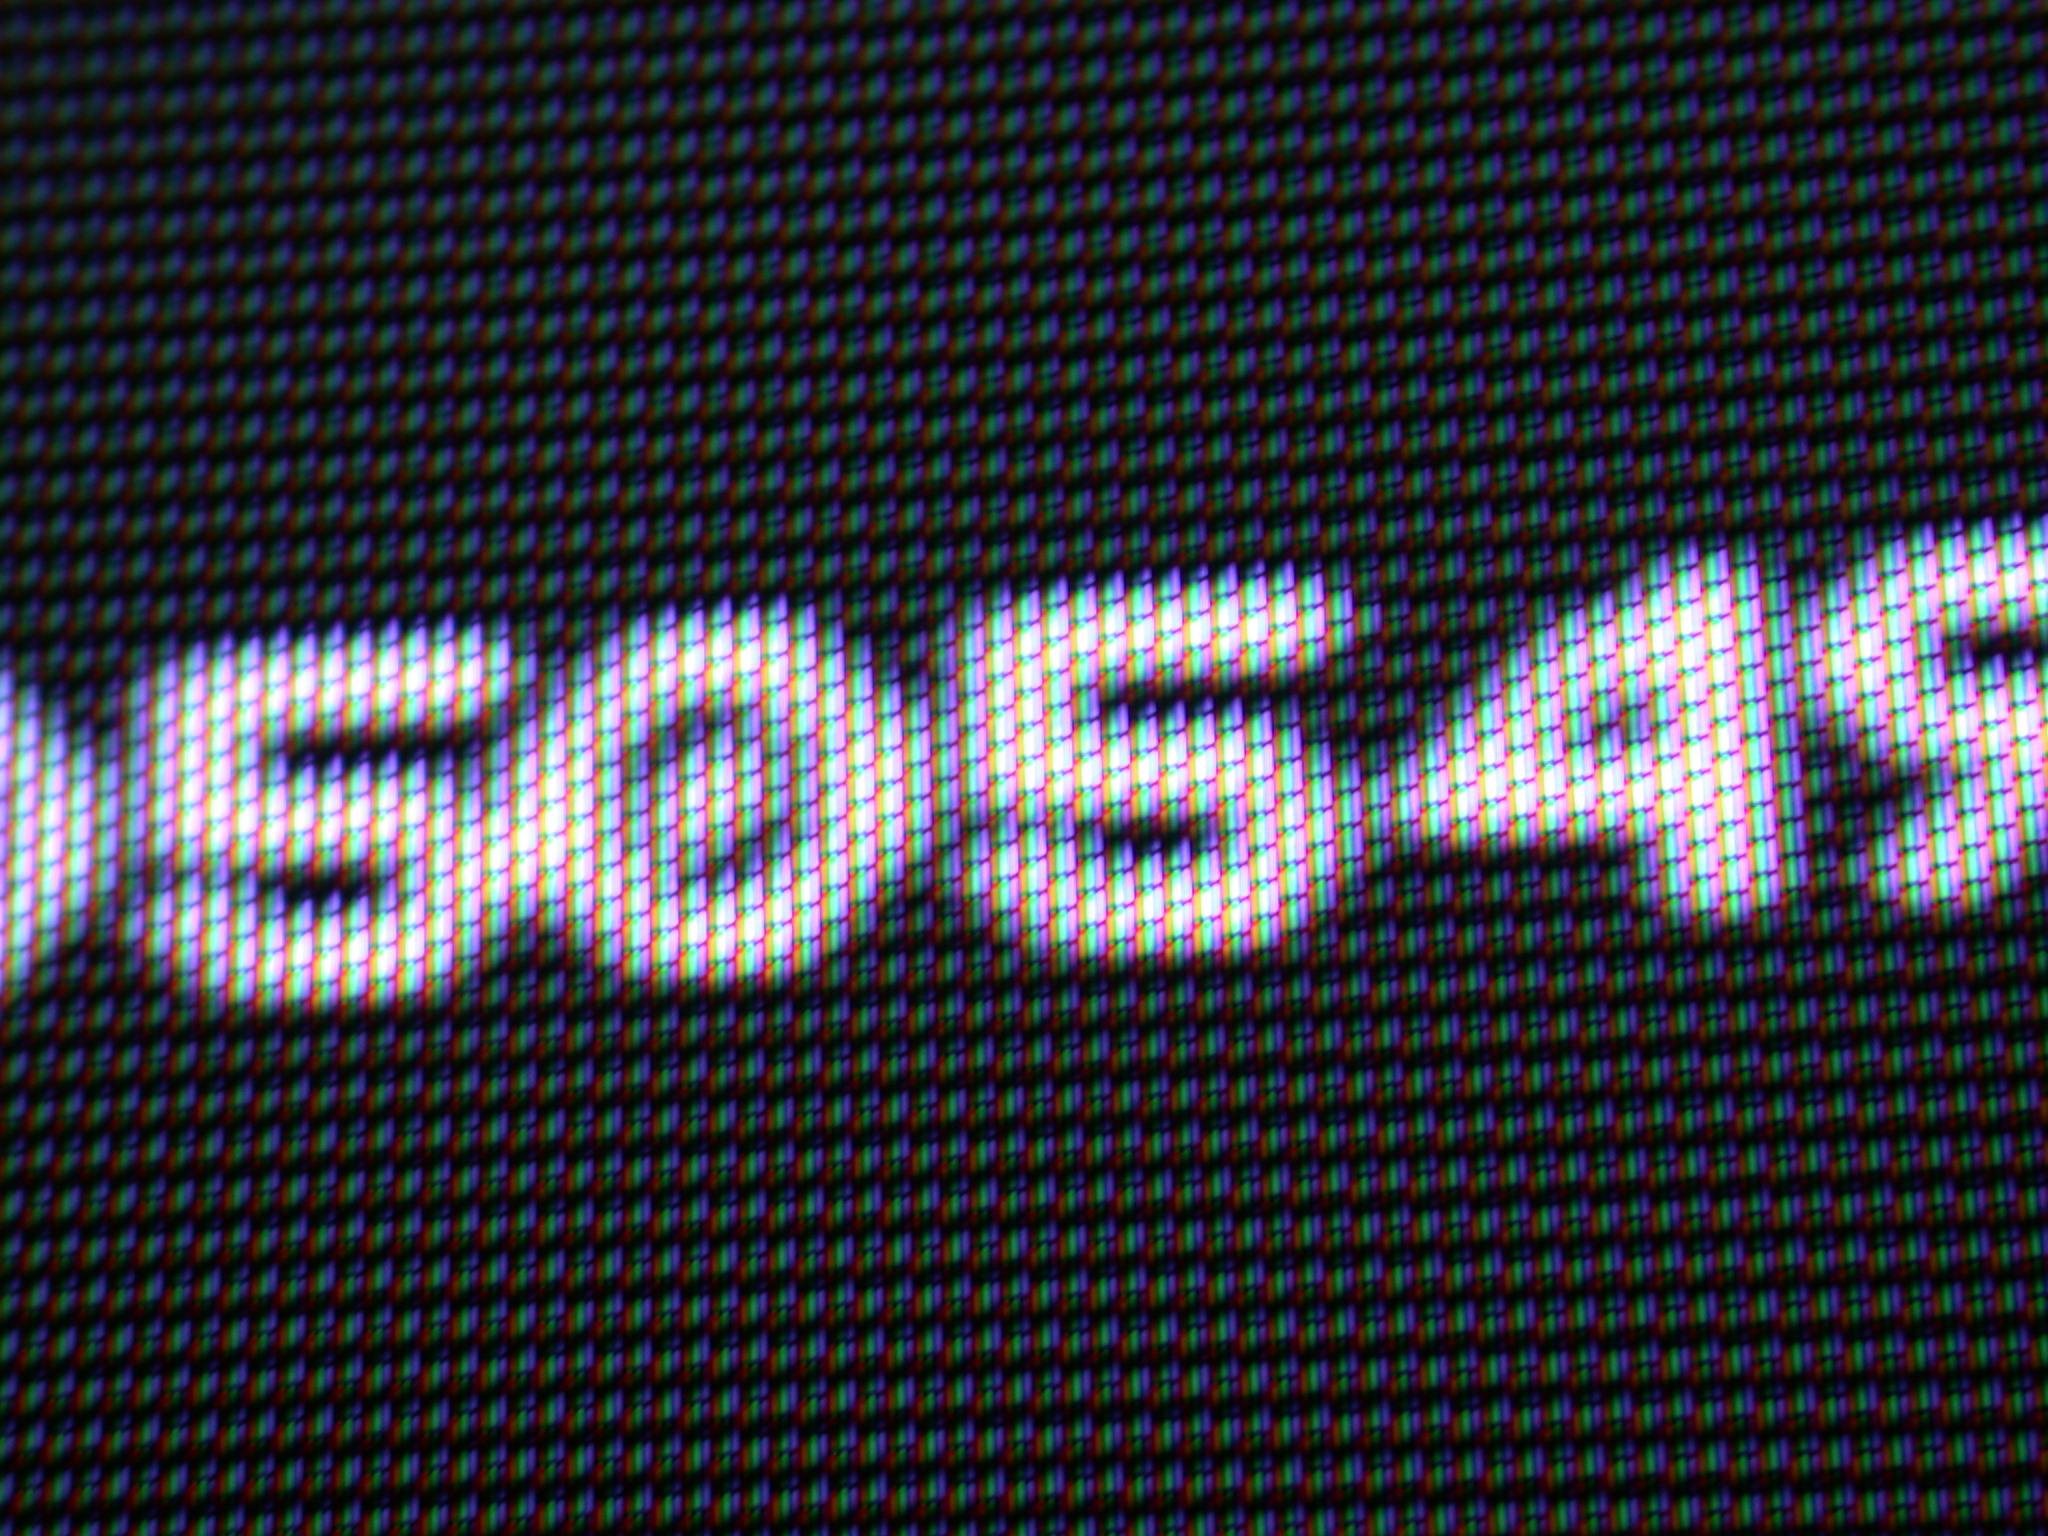 computer monitor display pixel pixels number numbers 5 0 4 9 binary black and white